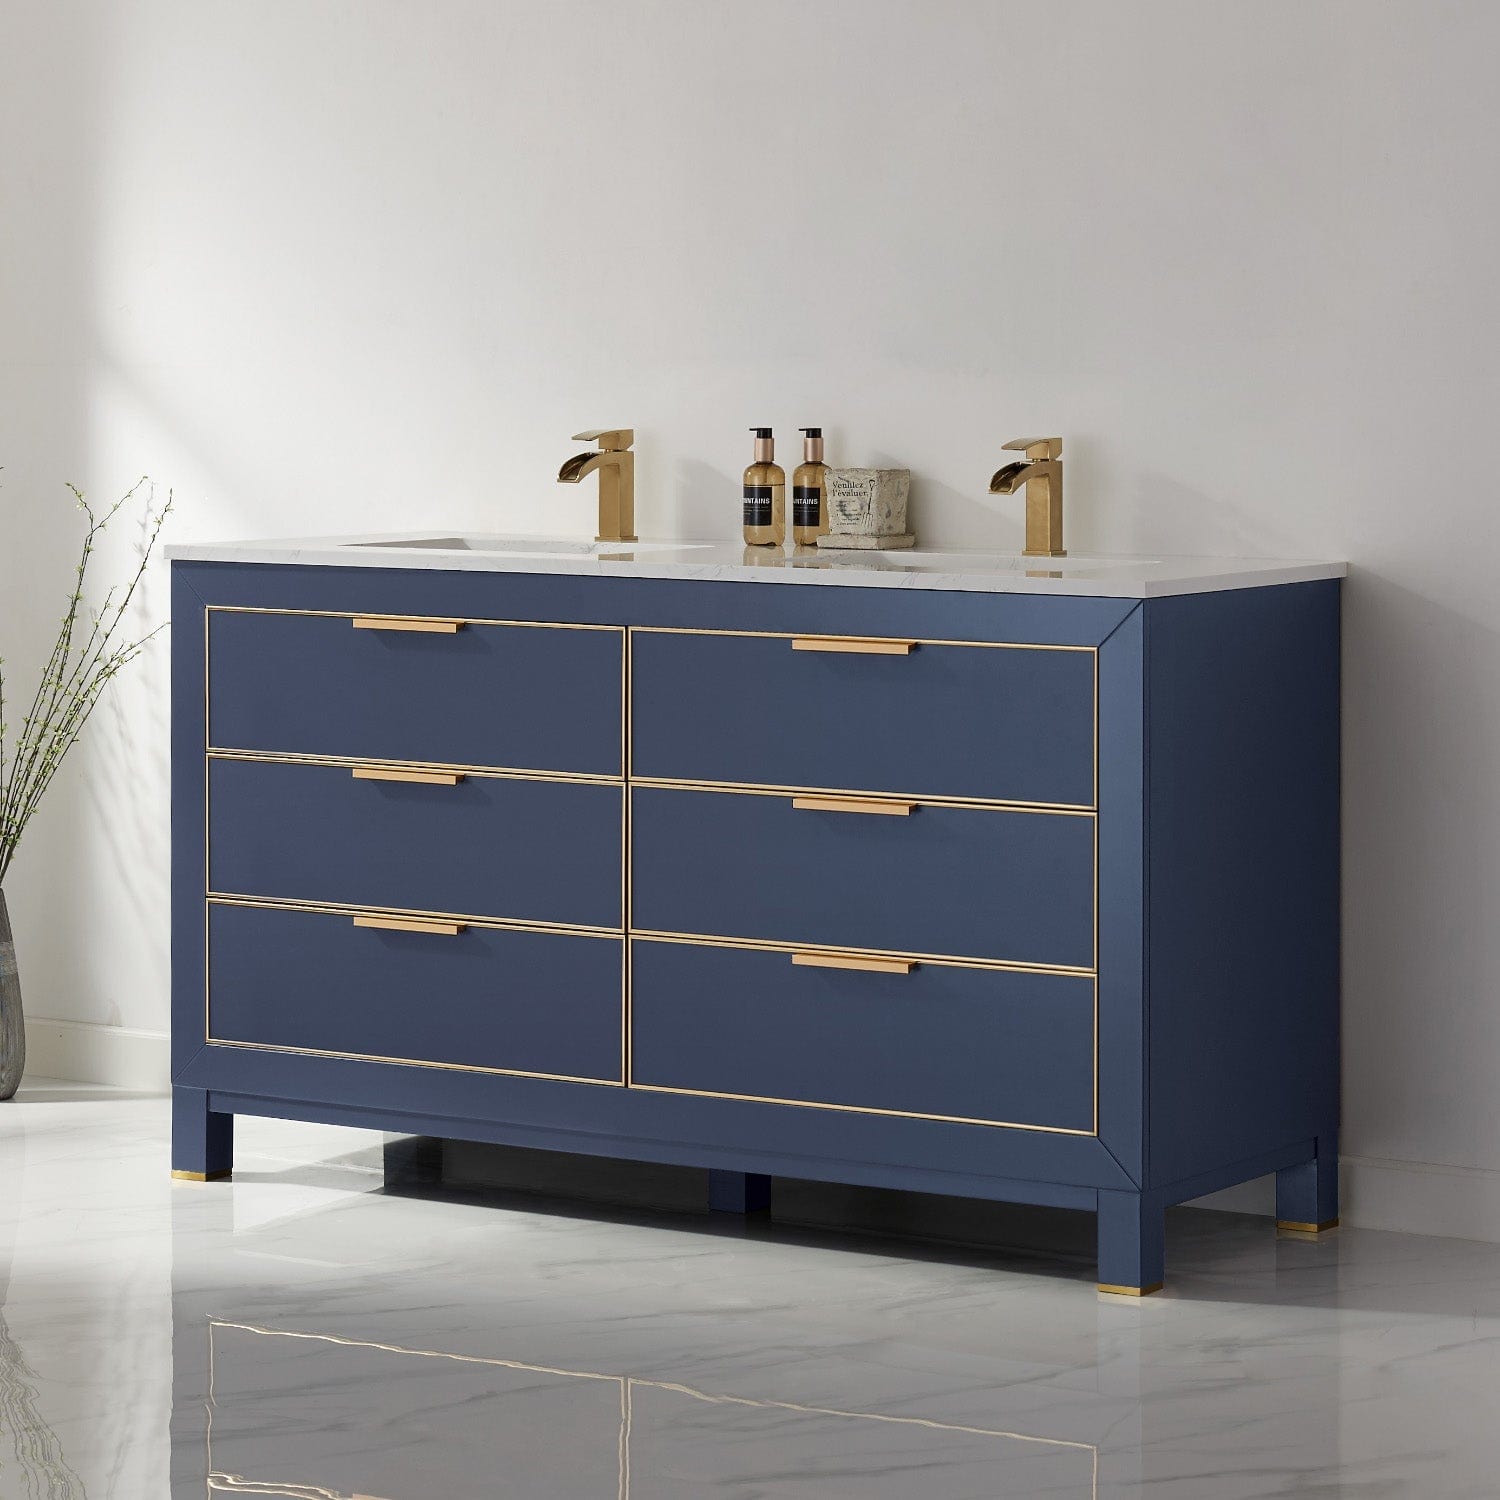 Altair Jackson 60" Double Bathroom Vanity Set in Royal Blue and Composite Carrara White Stone Countertop without Mirror 533060-RB-AW-NM - Molaix631112971669Vanity533060-RB-AW-NM